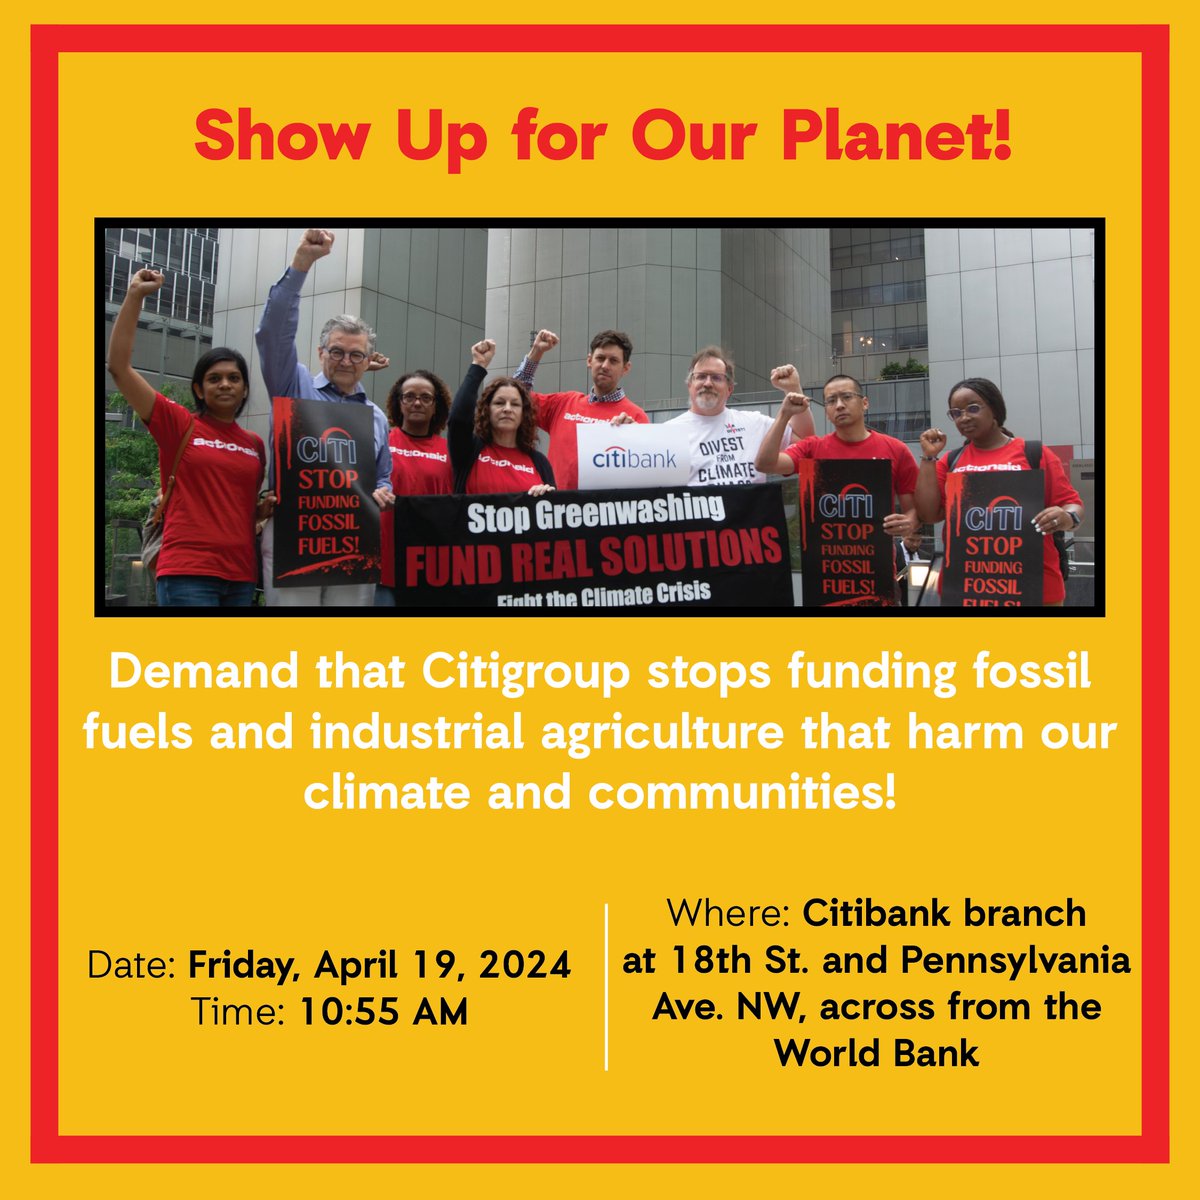 Let's make our voices heard! 📢 Join ActionAid as we take our #FundOurFuture petition to @Citi’s office in DC. 📍 Washington, DC 🗓️ Friday, April 19 🕚 10:55 am #ClimateJustice #Citigroup